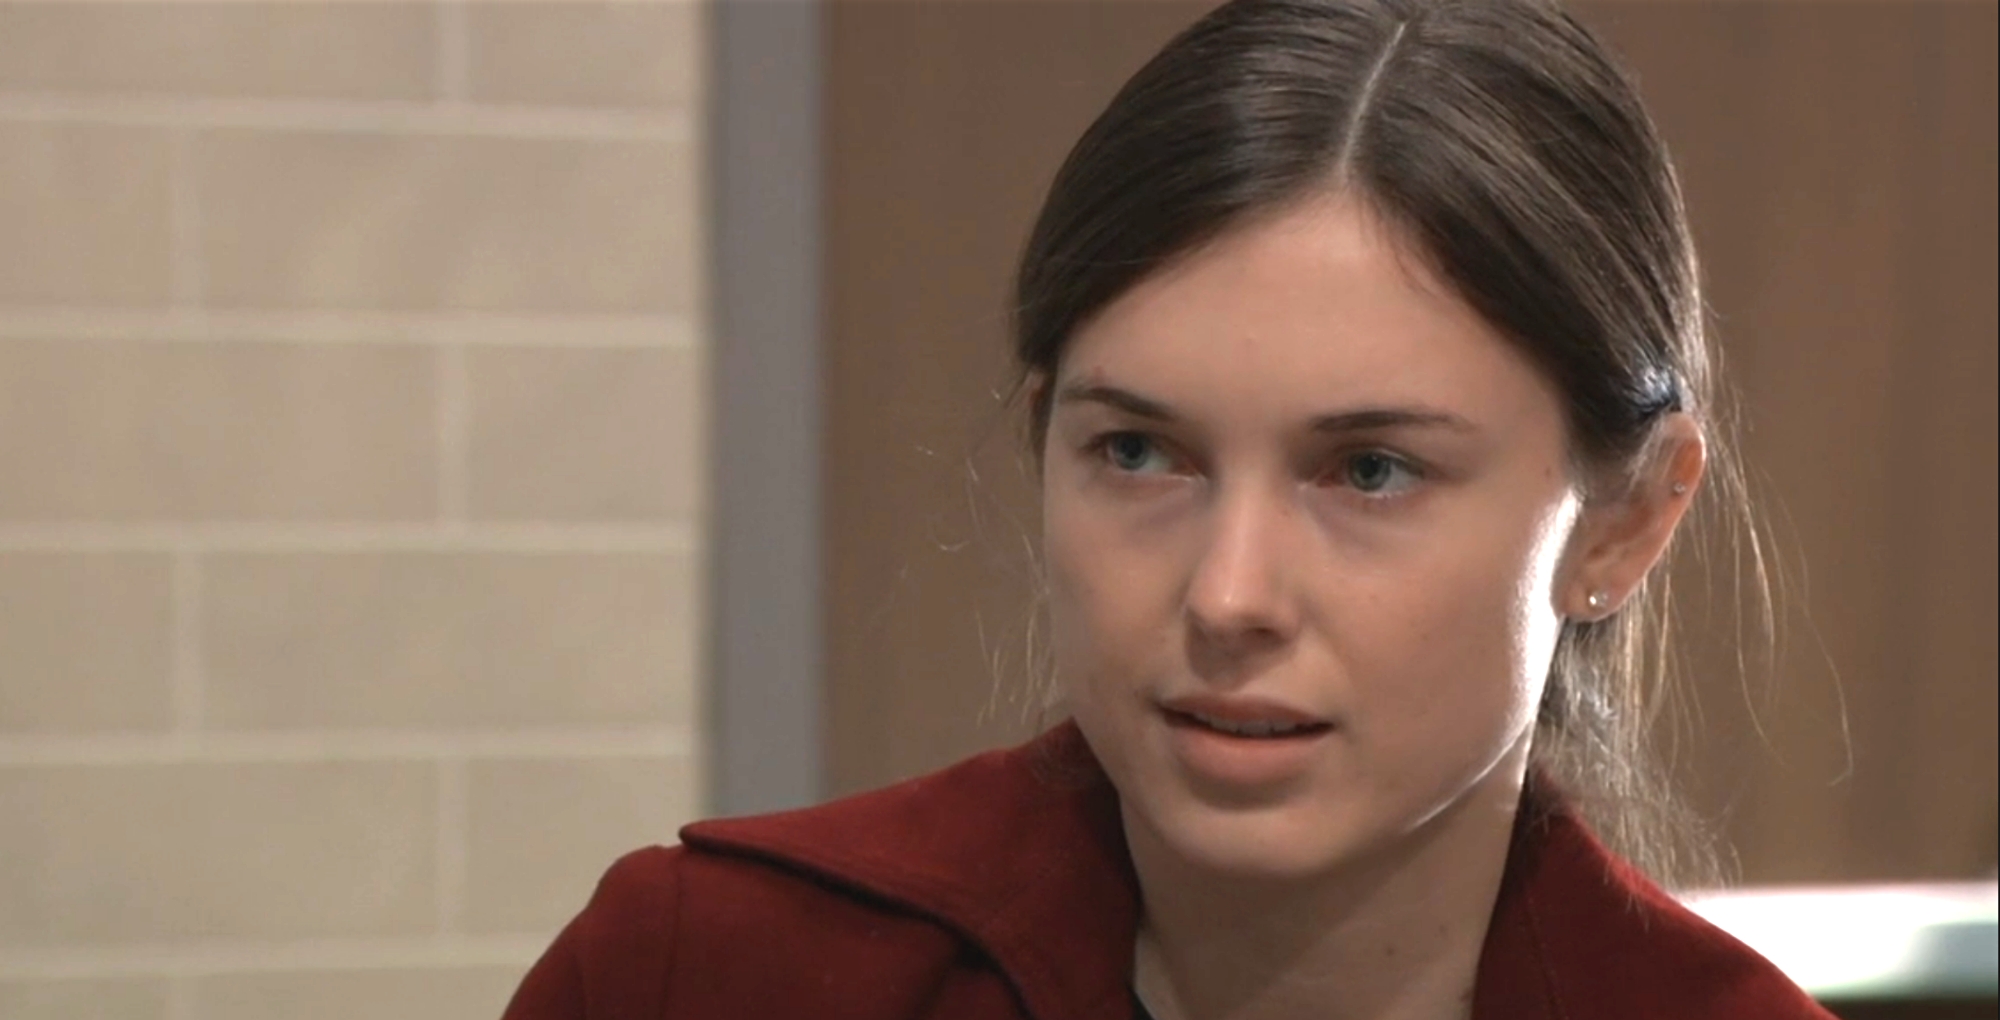 general hospital recap for march 7, 2023 has willow being very suspicious